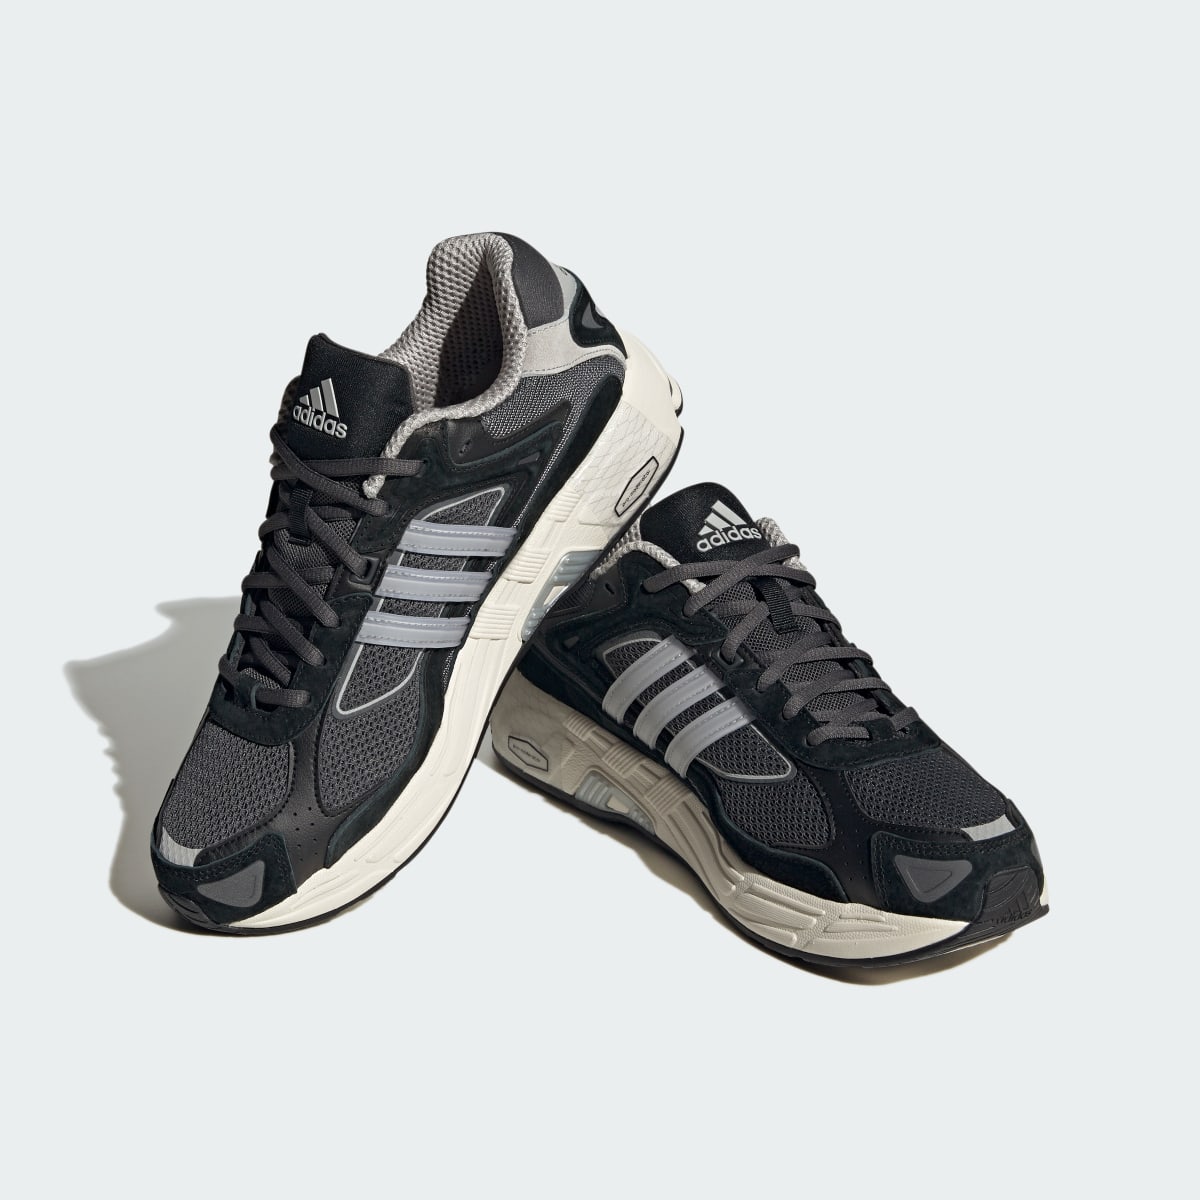 Adidas Chaussure Response CL. 5